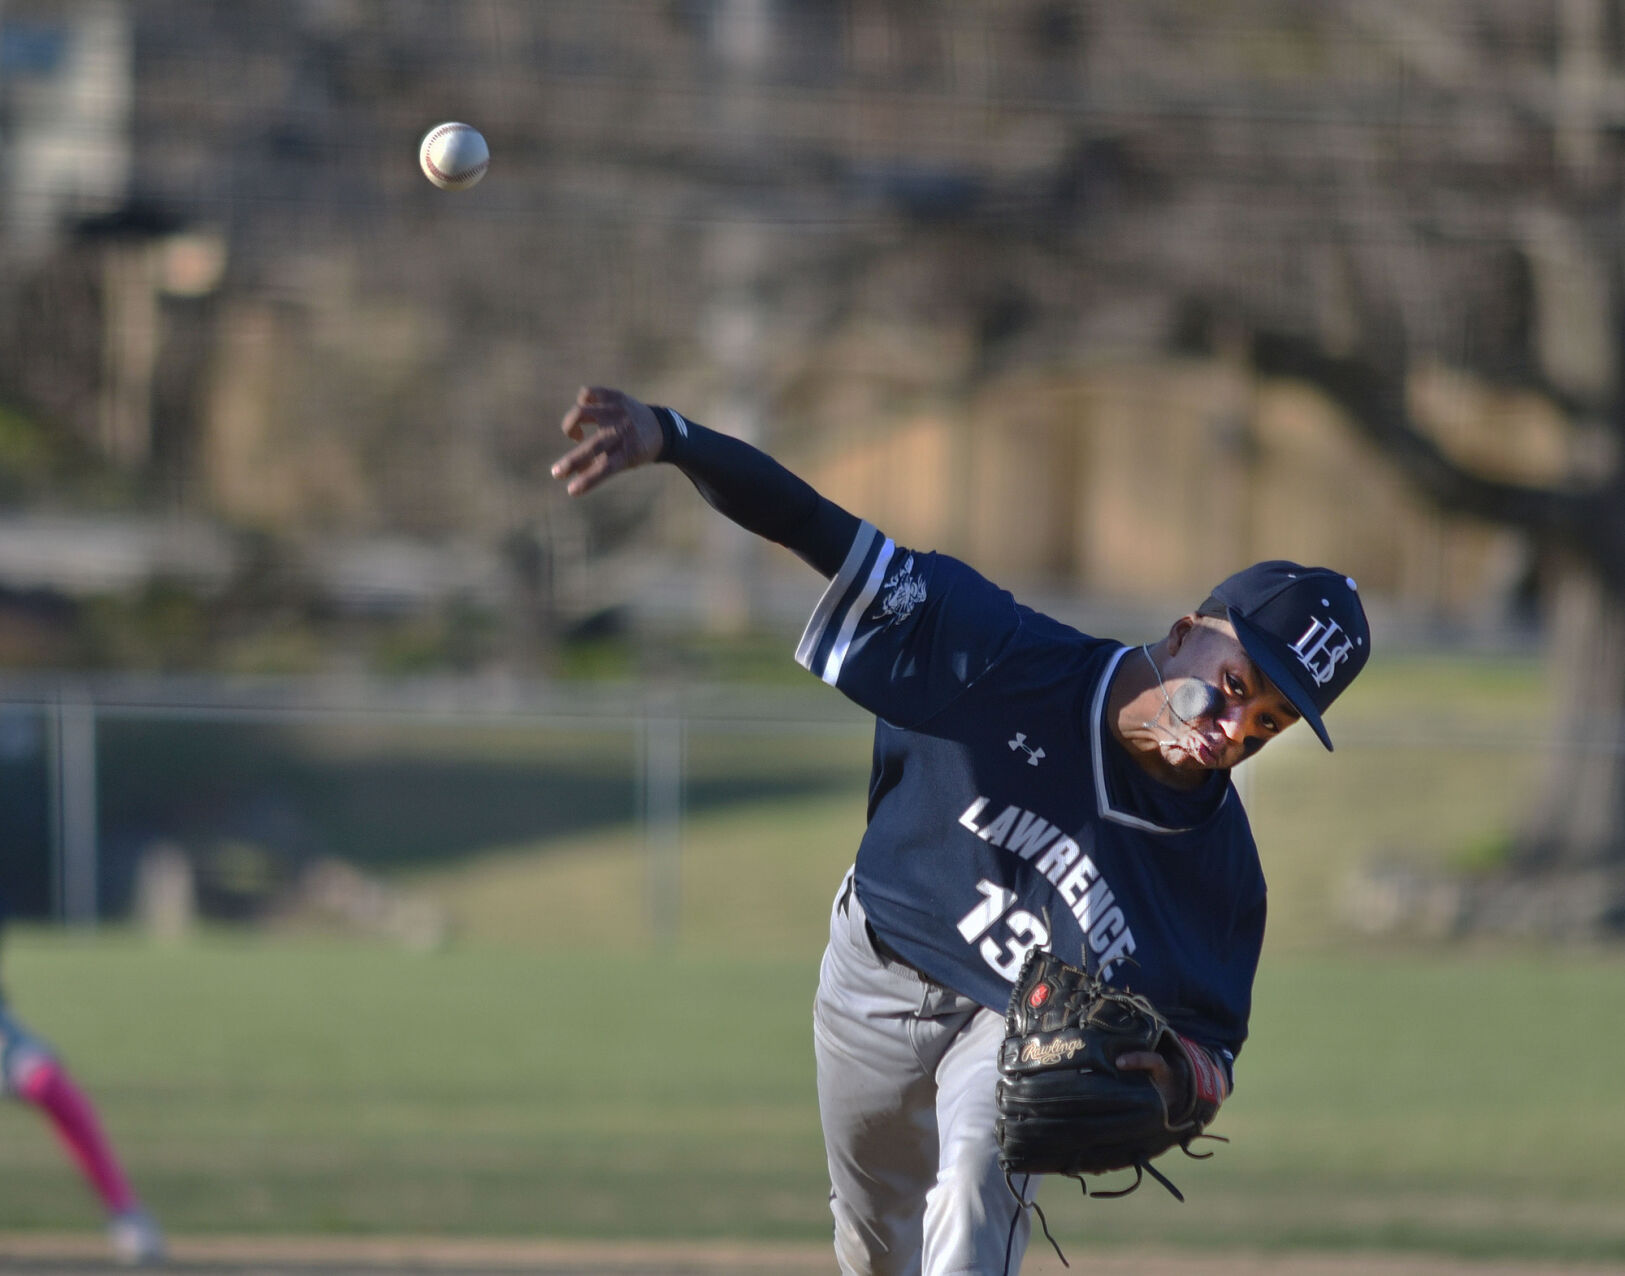 Lawrence wins by forfeit over Andover: MIAA rules after use of ineligible pitcher